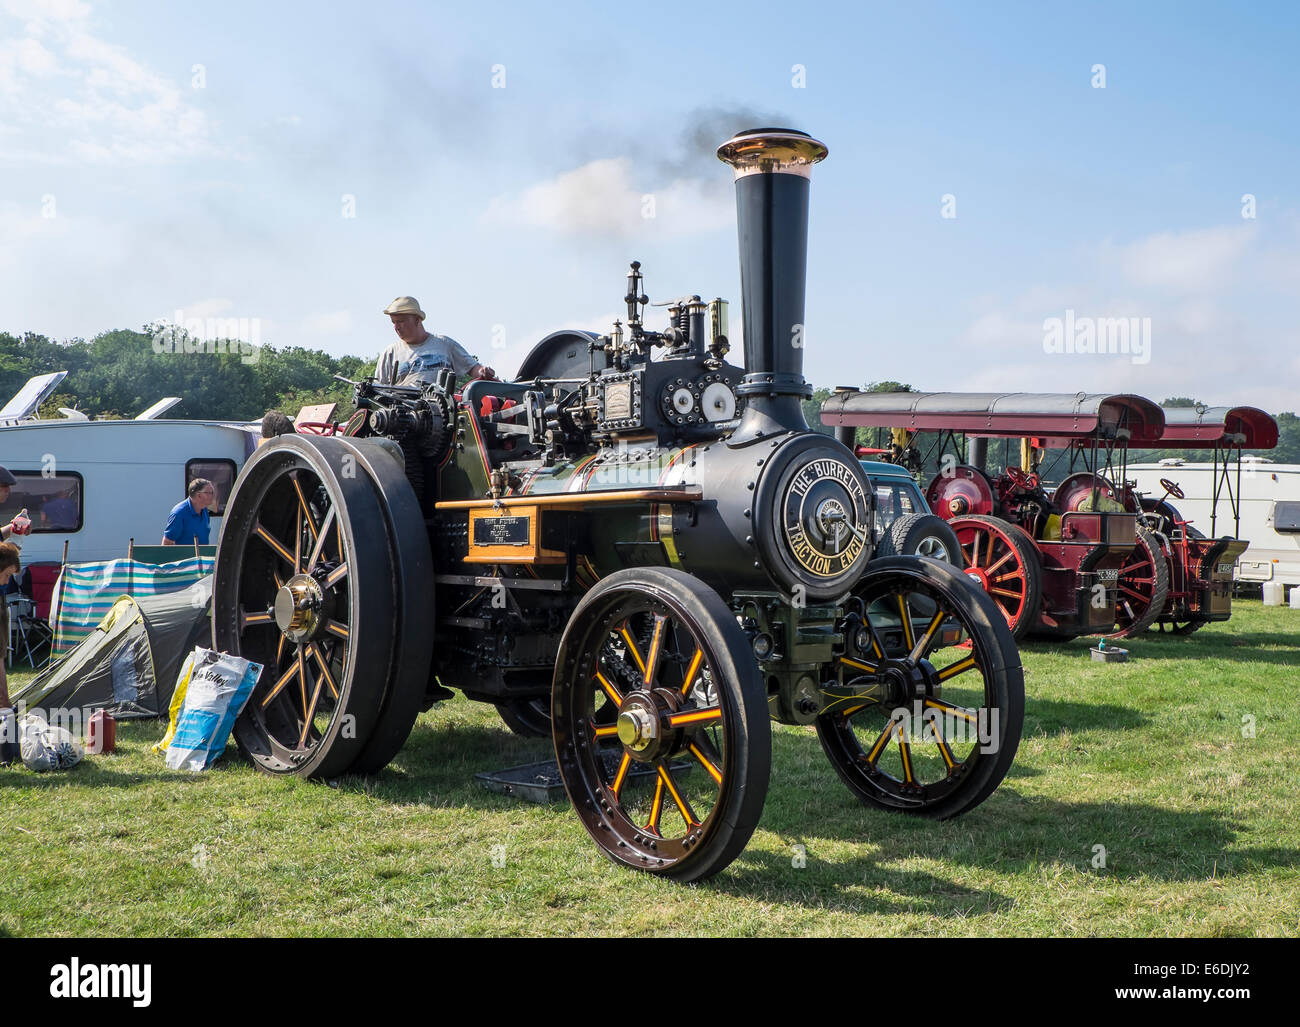 The Burrell traction engine raising steam ready for show display at show ground for Cambridgeshire Steam Rally and Country Fair Stock Photo